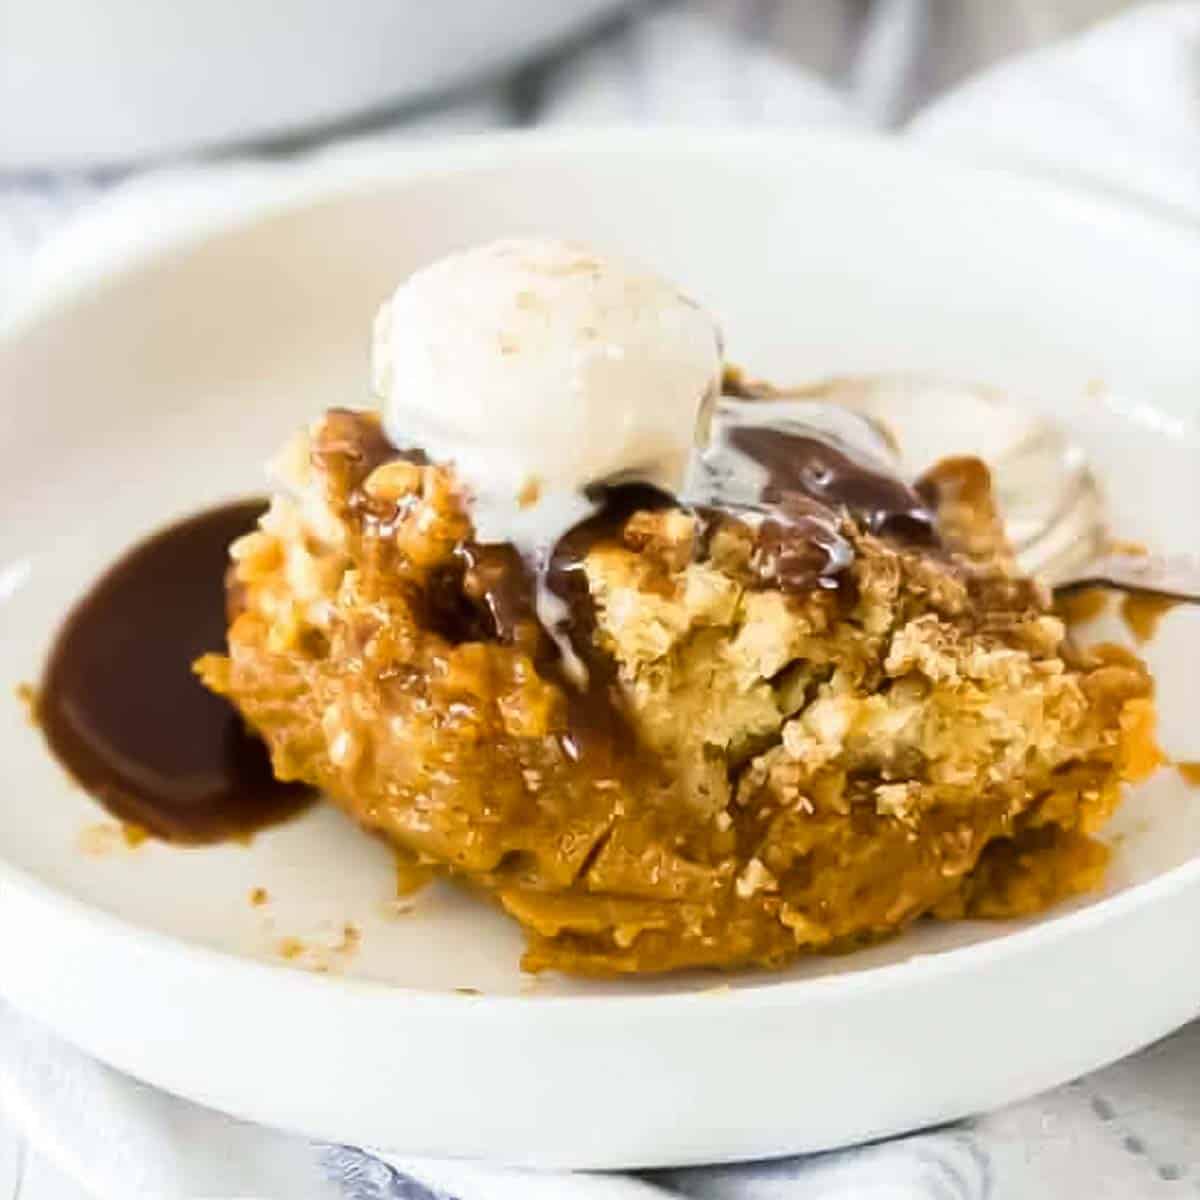 ice cream melting over pumpkin cobbler with toffee sauce